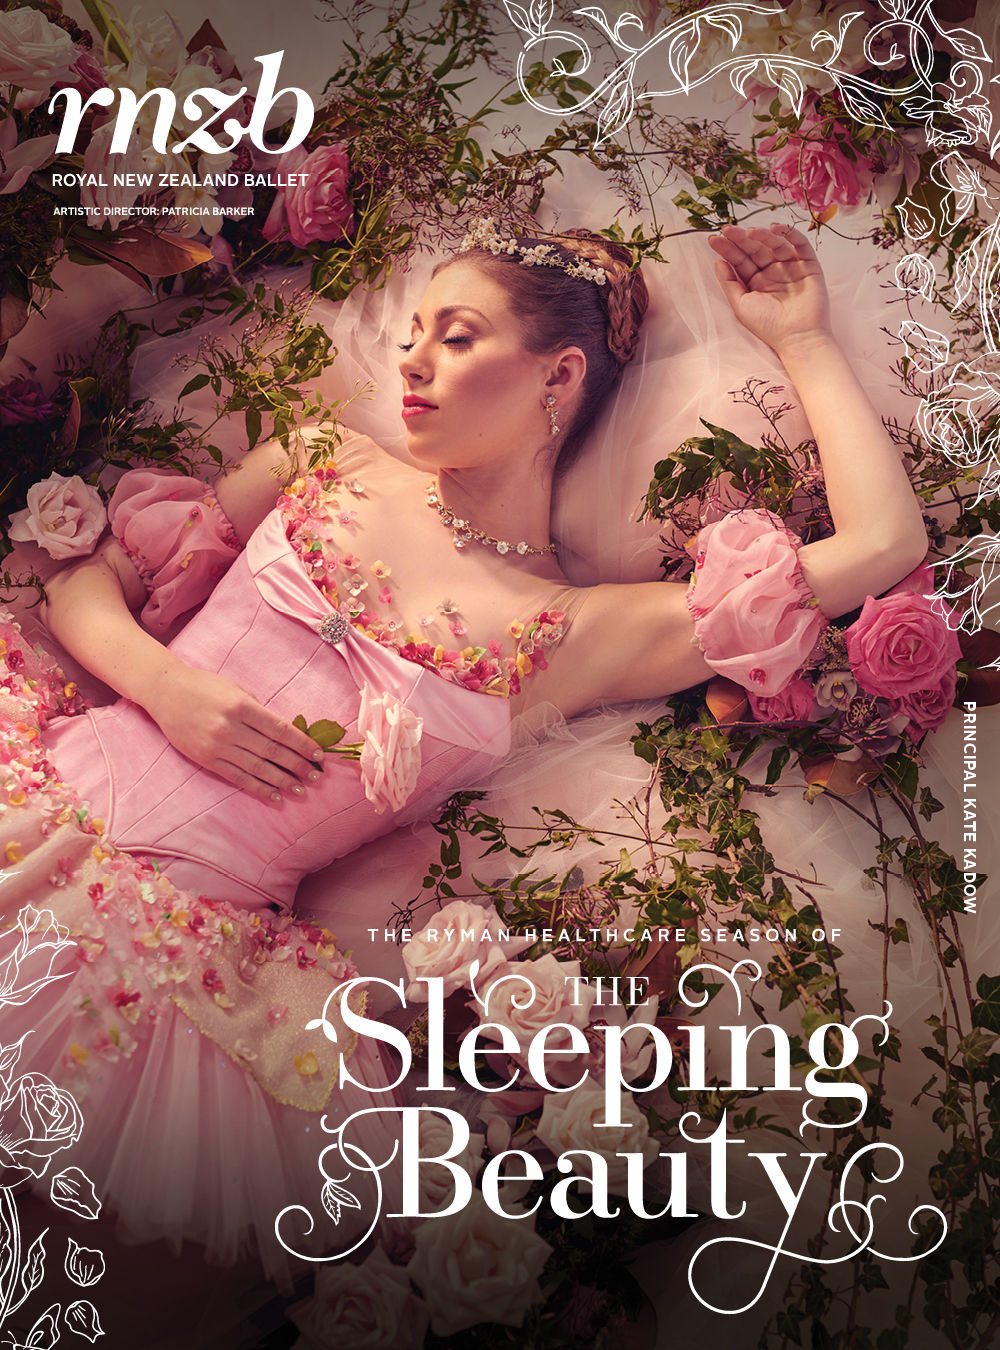 The Sleeping Beauty — Live in Your Living Room